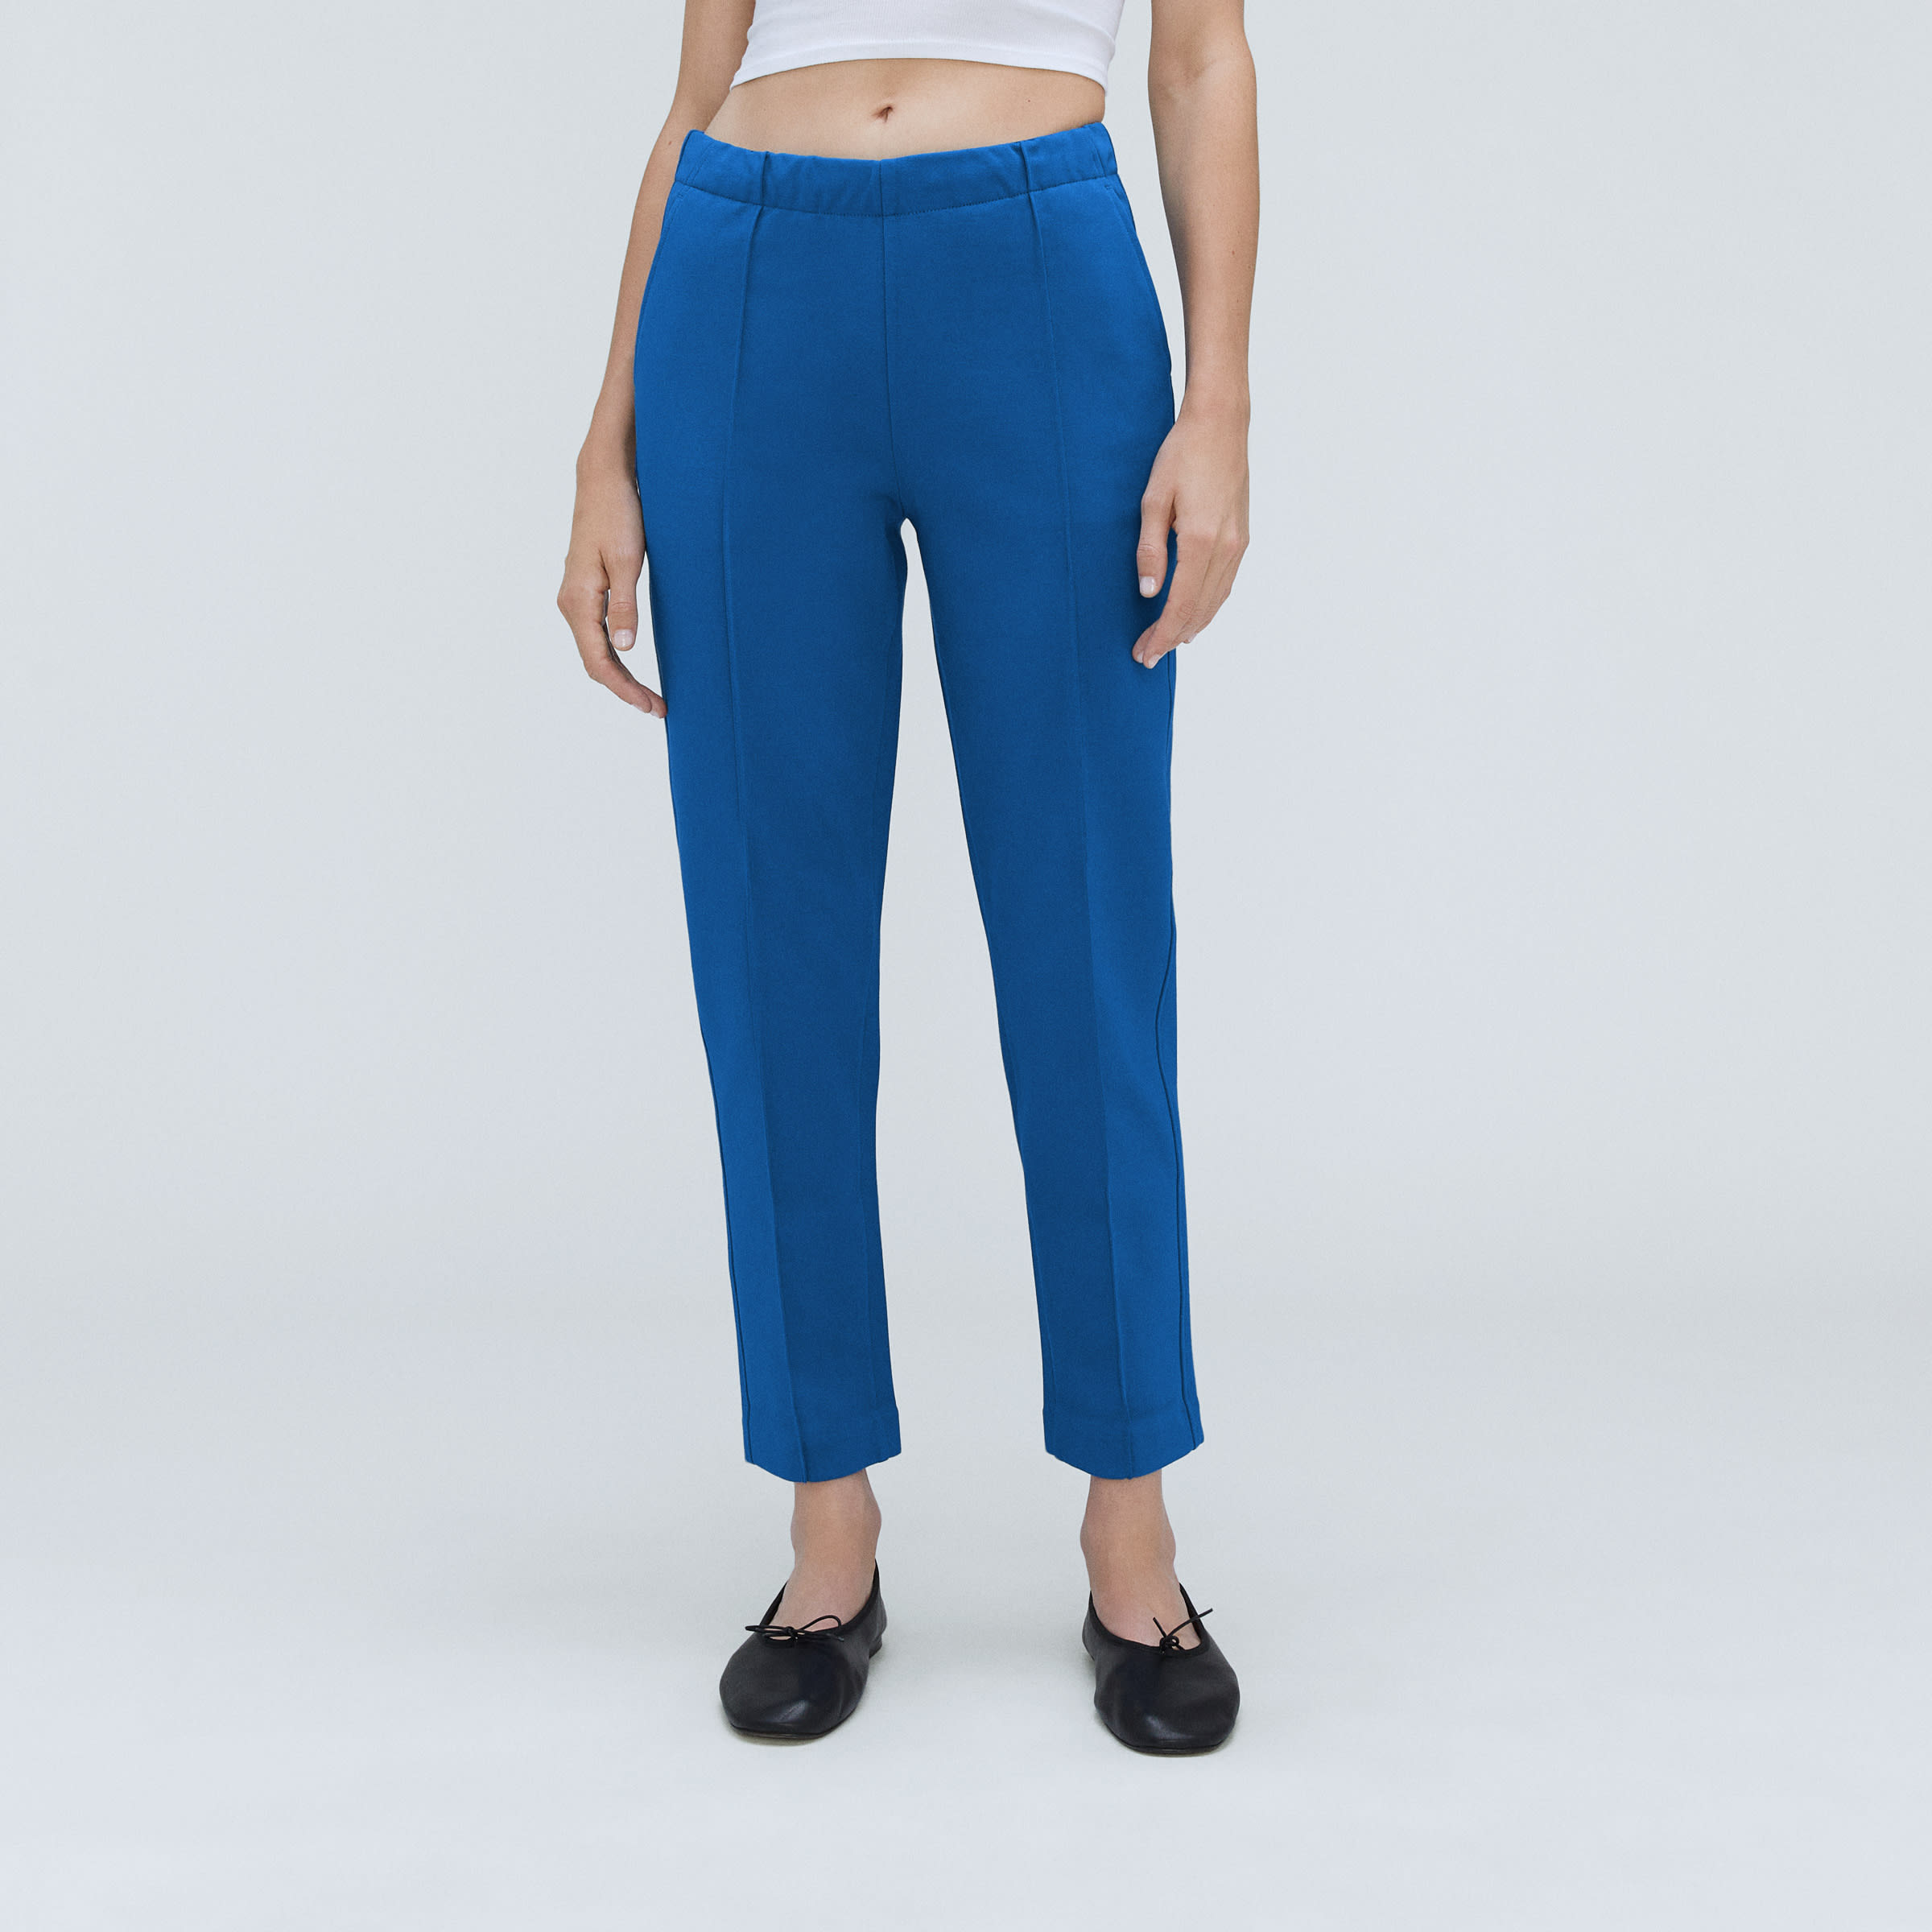 The Everlane Dream Pant Is a Trouser-Sweatpant Hybrid